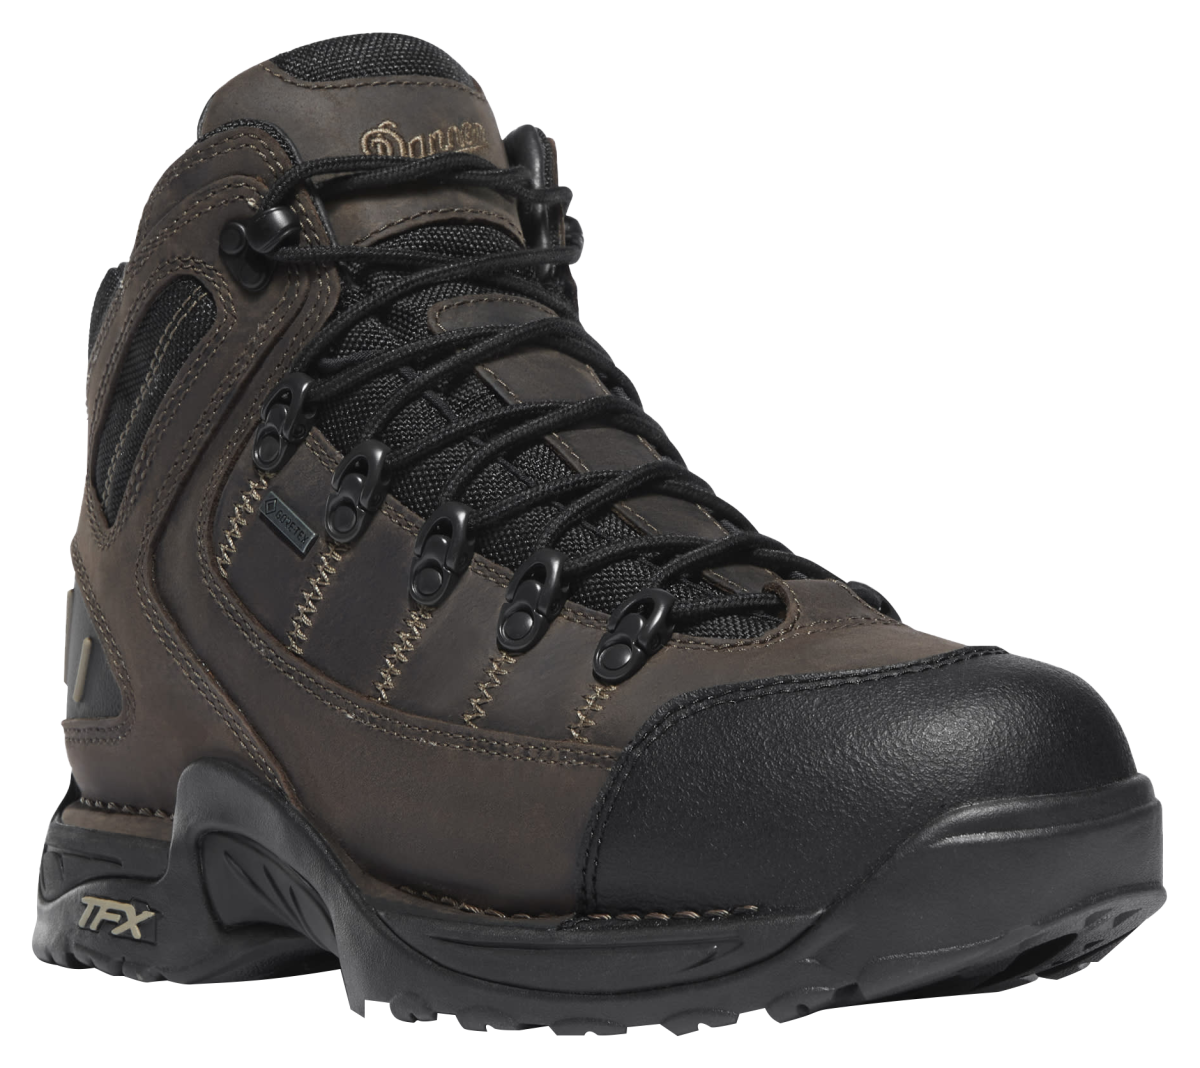 Danner 453 GORE-TEX Waterproof Hiking Boots for Men - Loam Brown/Chocolate Chip - 10.5M